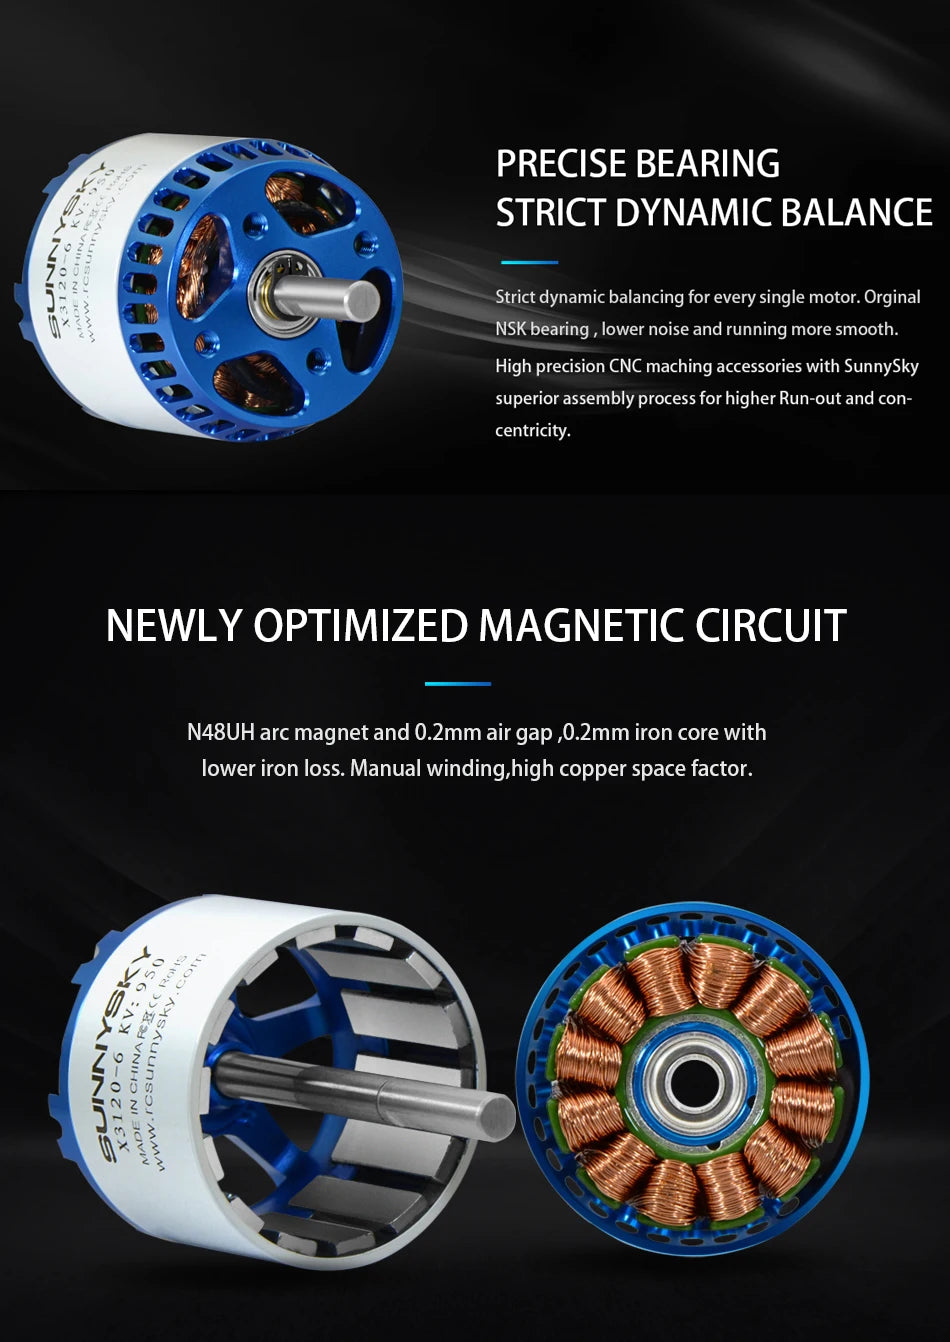 PRECISE BEARING STRICT DYNAMIC BALANCE for every single